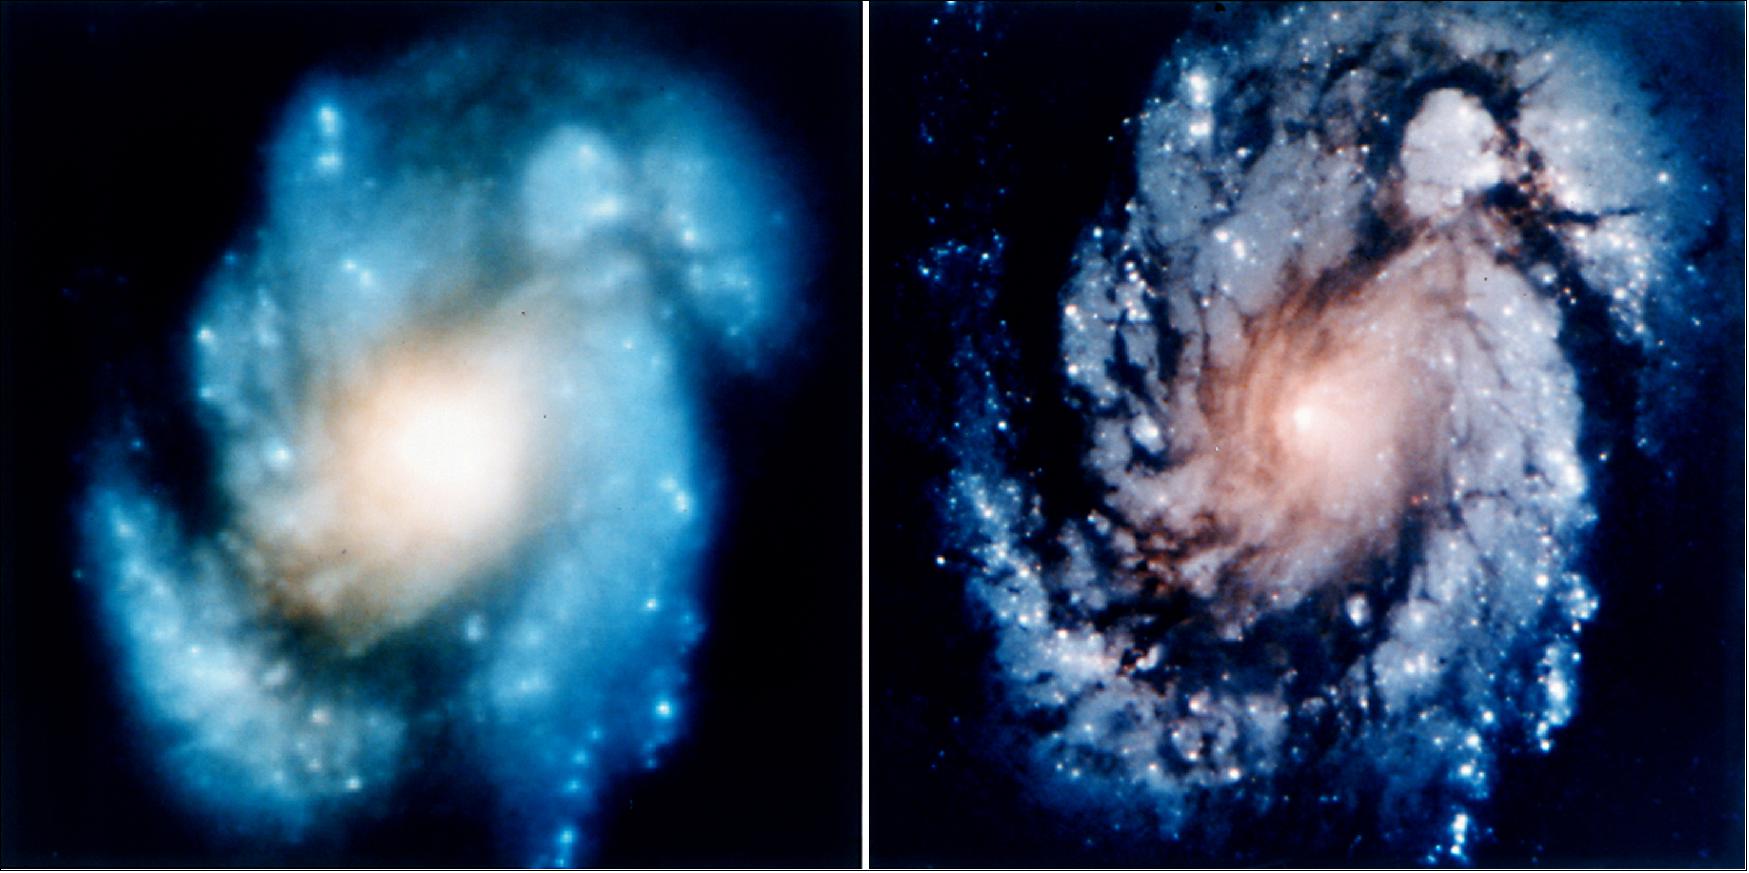 Figure 55: This comparison image of the core of the galaxy M100 shows the dramatic improvement in Hubble Space Telescope's view of the universe after the first servicing mission in December 1993. The original view, taken a few days before the servicing mission, is on the left (image credit: NASA, Ref. 76)